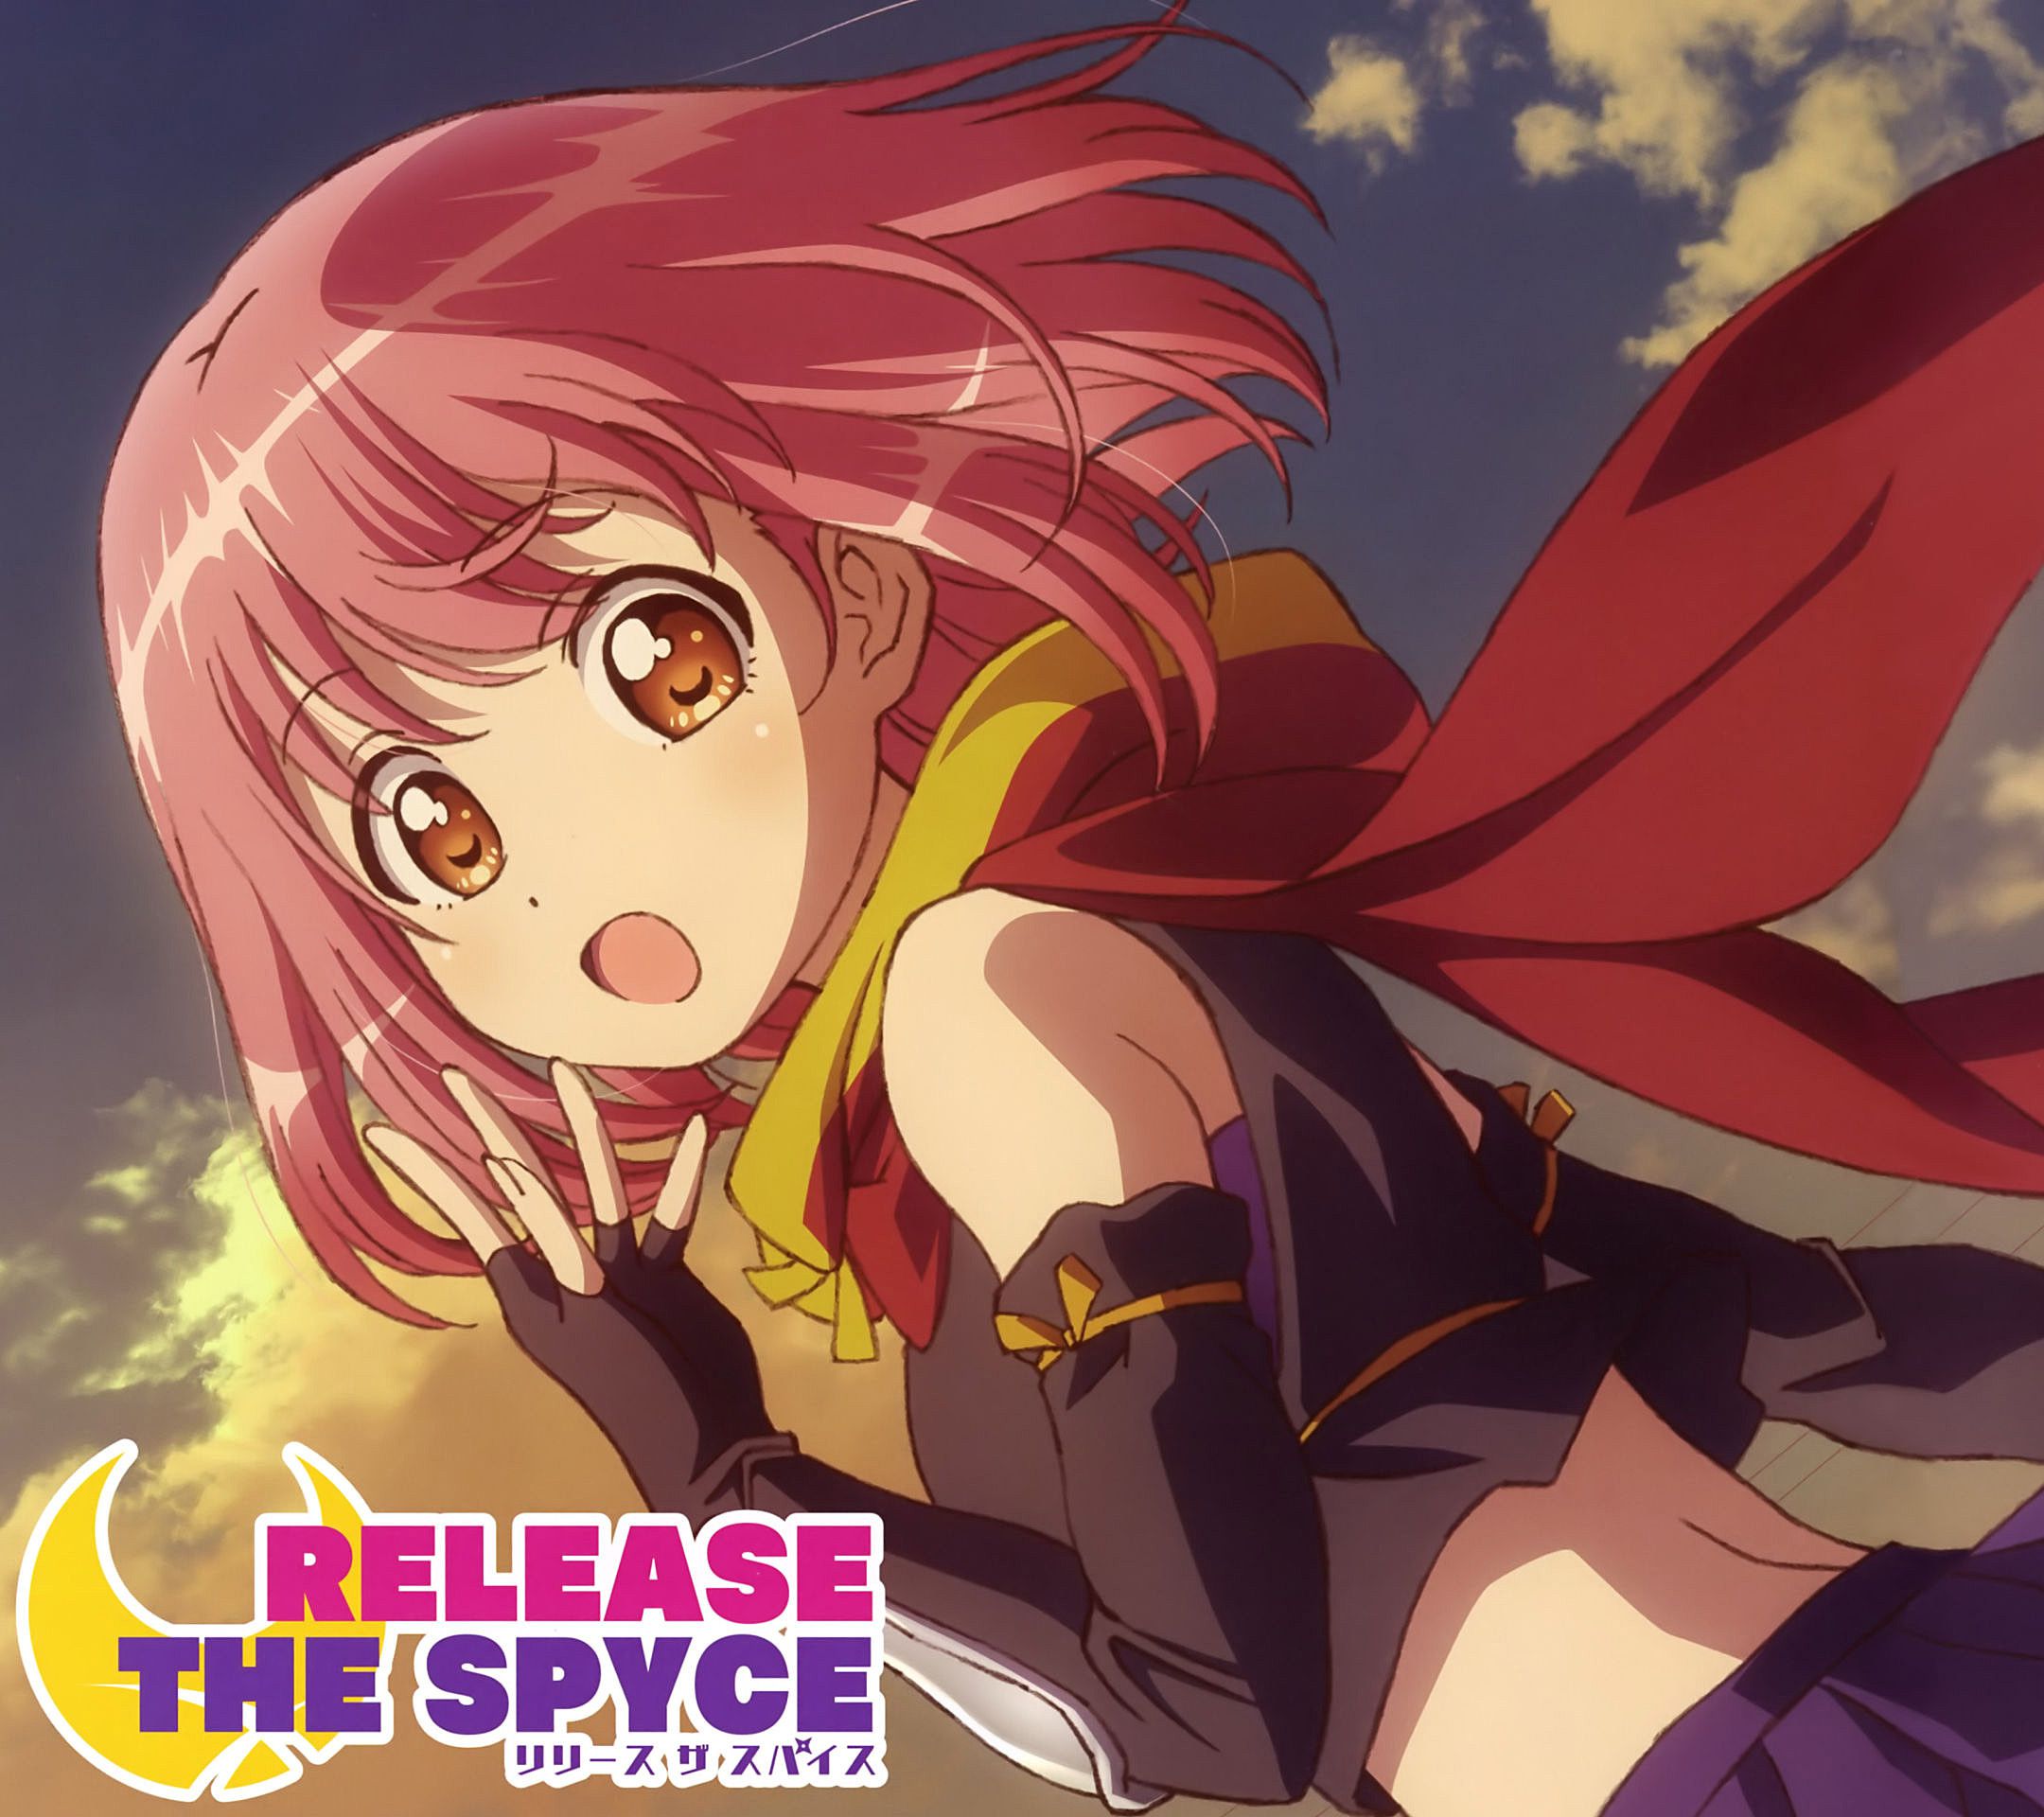 Release The Spyce リリスパ Androidスマホ壁紙画像 2160 1920他 1 アニメ壁紙ネット Pc Android Iphone壁紙 画像